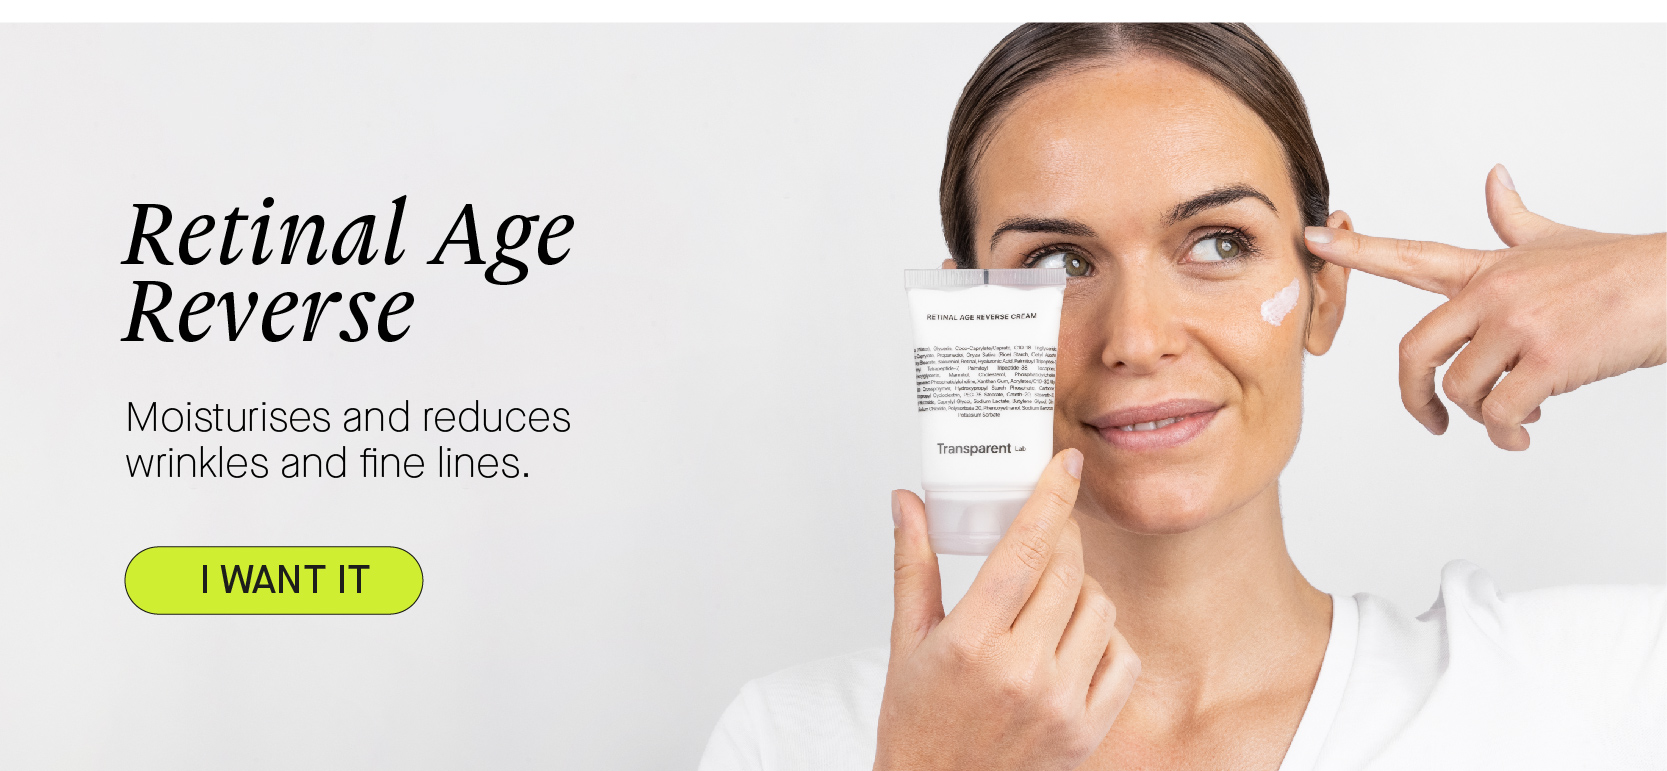 Retinal Age Reverse Moisturises and reduces wrinkles and fine lines. 